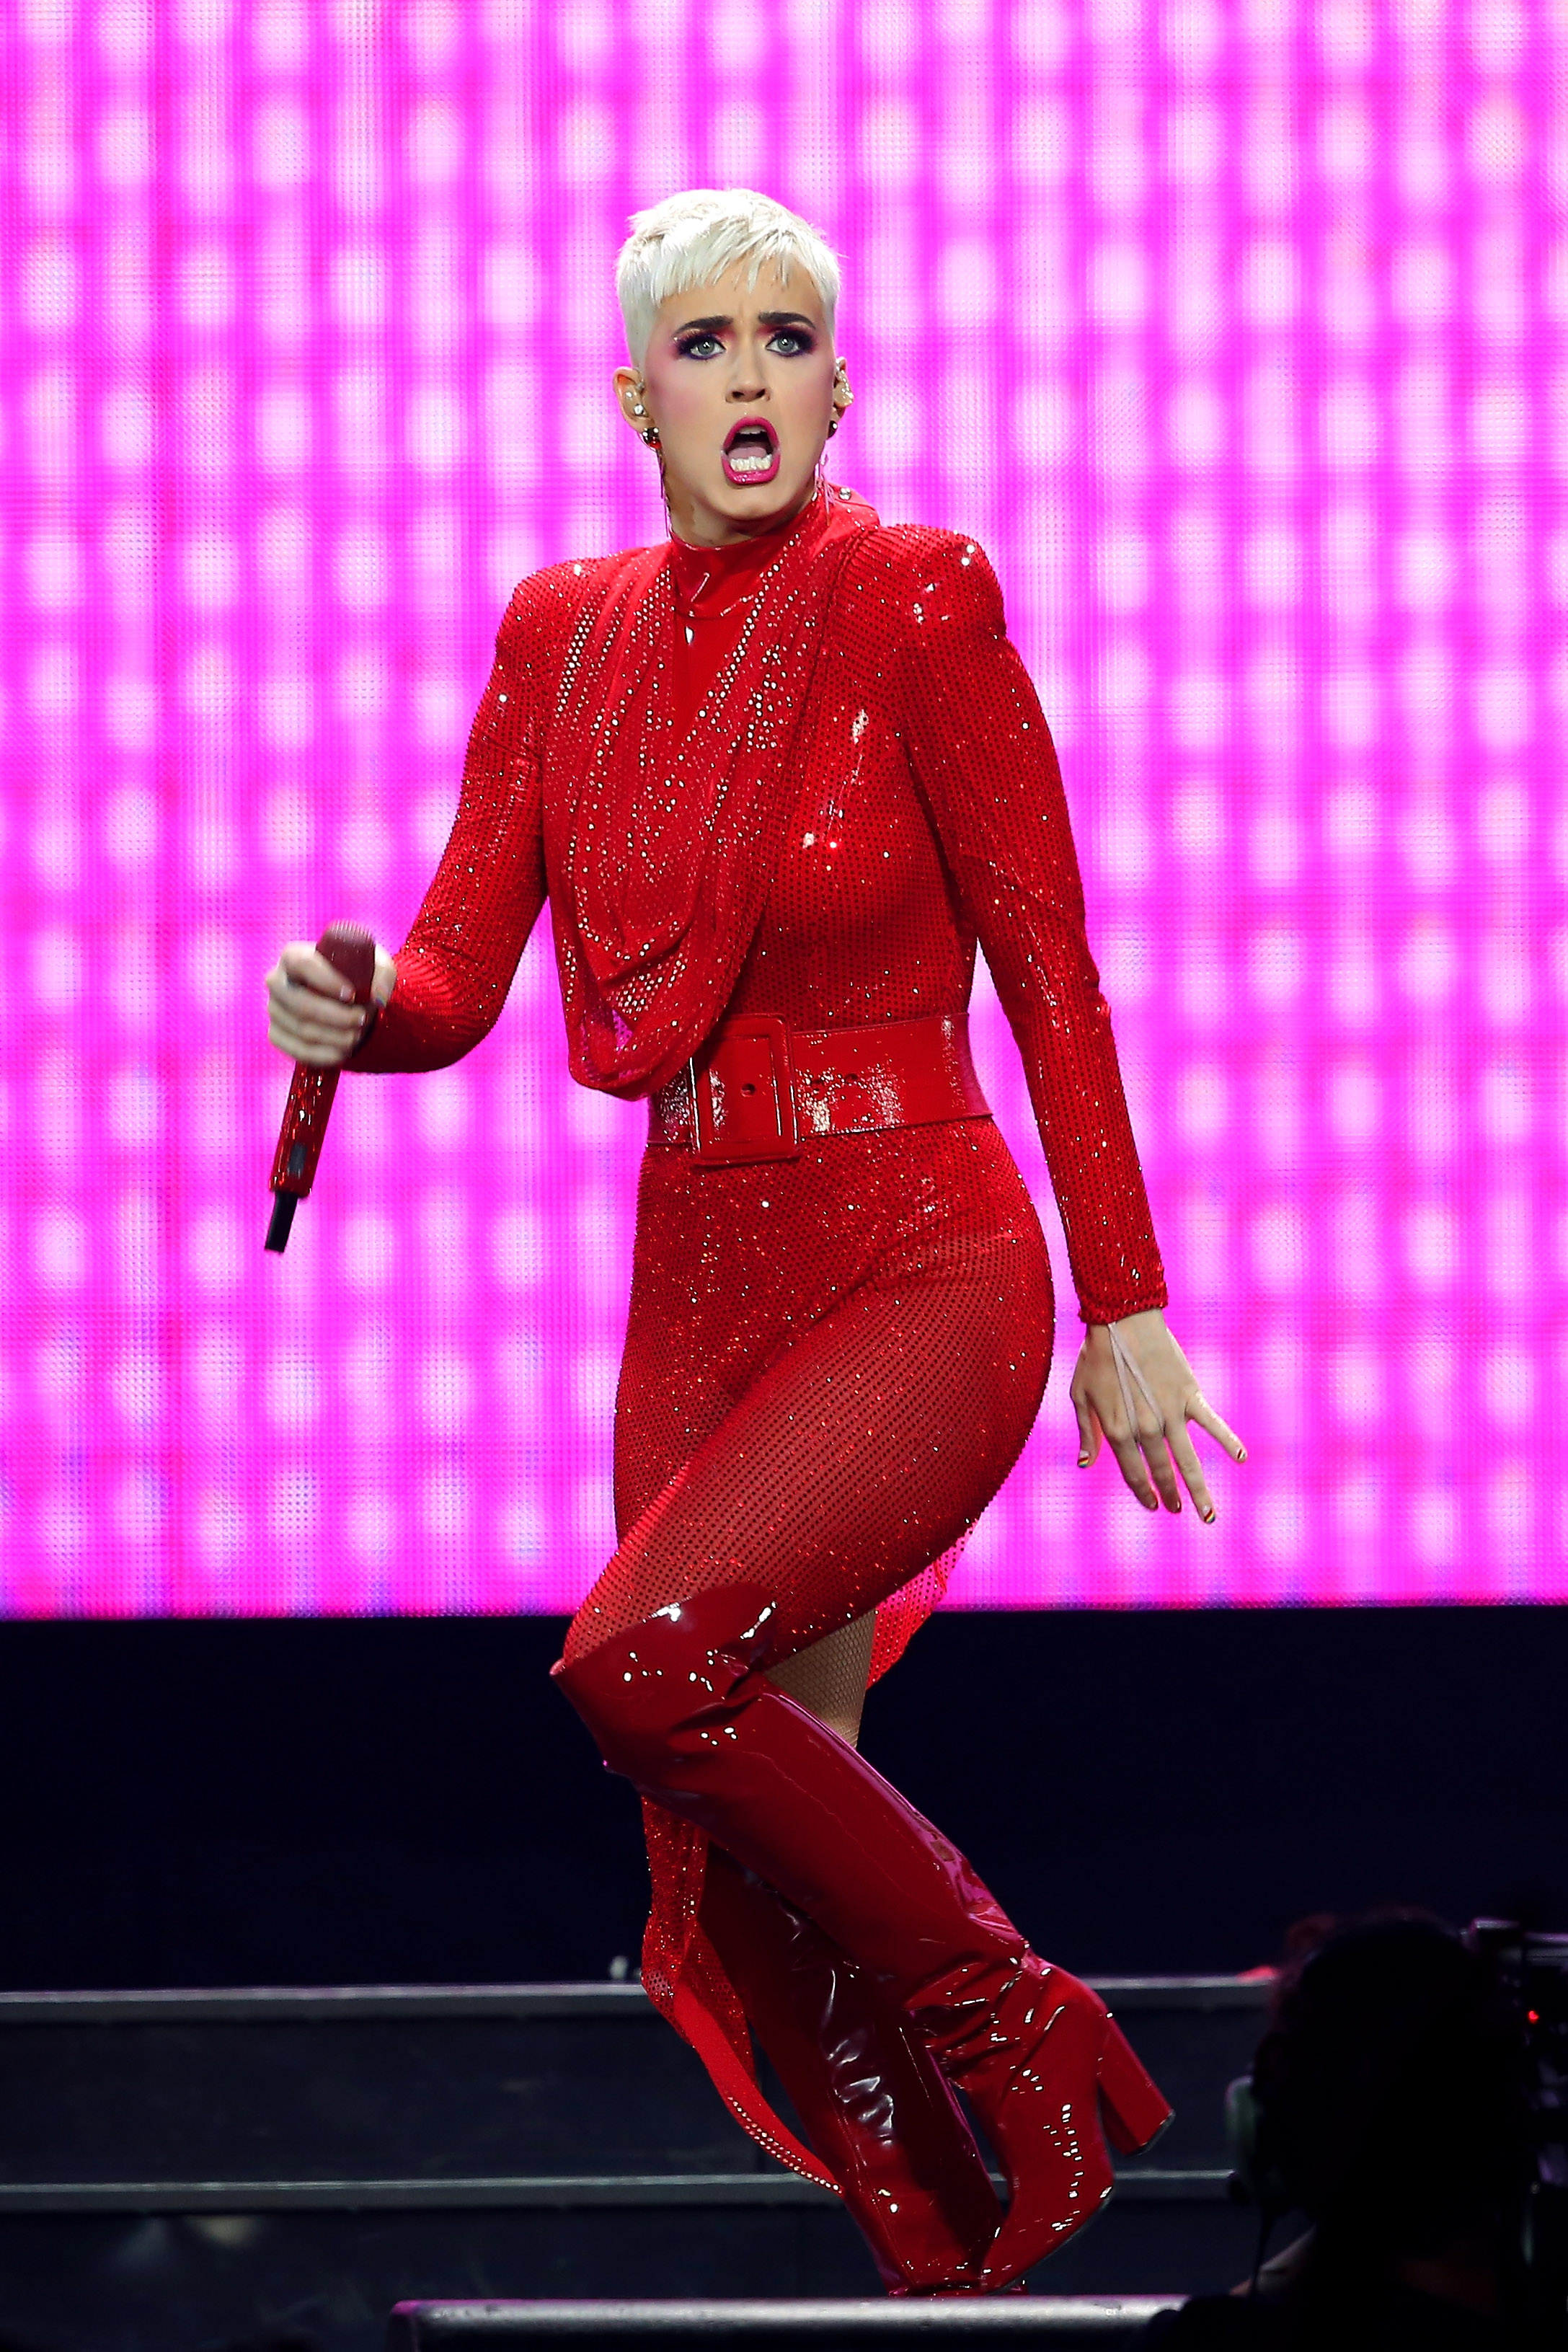 Katy Perry performs live on stage during the Witness: The Tour at The O2 Arena on June 14, 2018, in London, England. | Source: Getty Images